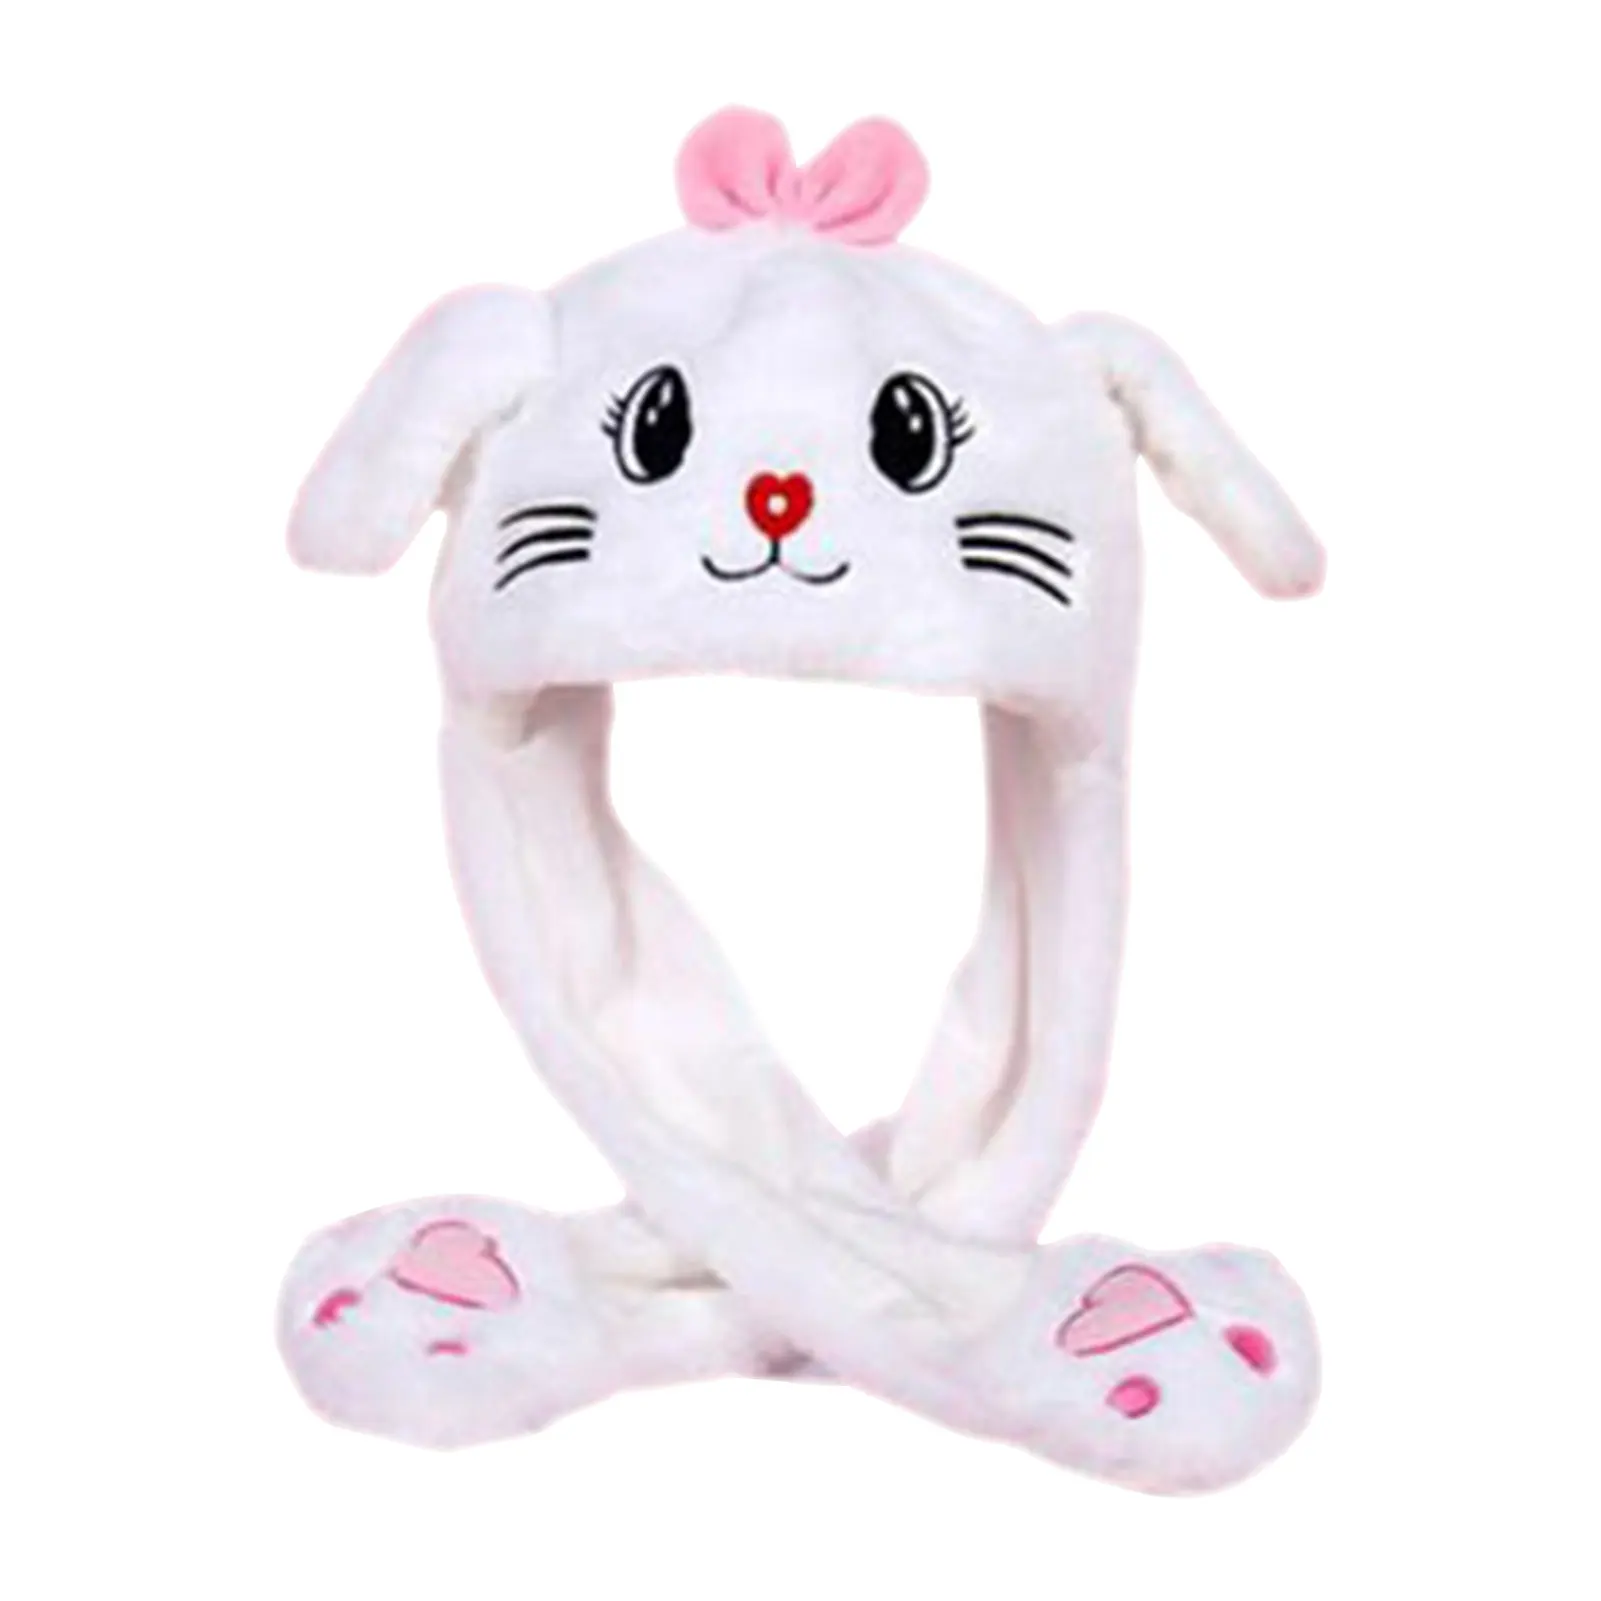 Lovely Moving Bunny Ears Hat Plush Rabbit Hat Funny Play Toy Up Down Moving Bunny Ears Toy Hat Girlfriend Children Girls Gifts funny toy hat tricky cosplay wear cartoon toy hat party dress up performance show toy hat comfortable wear